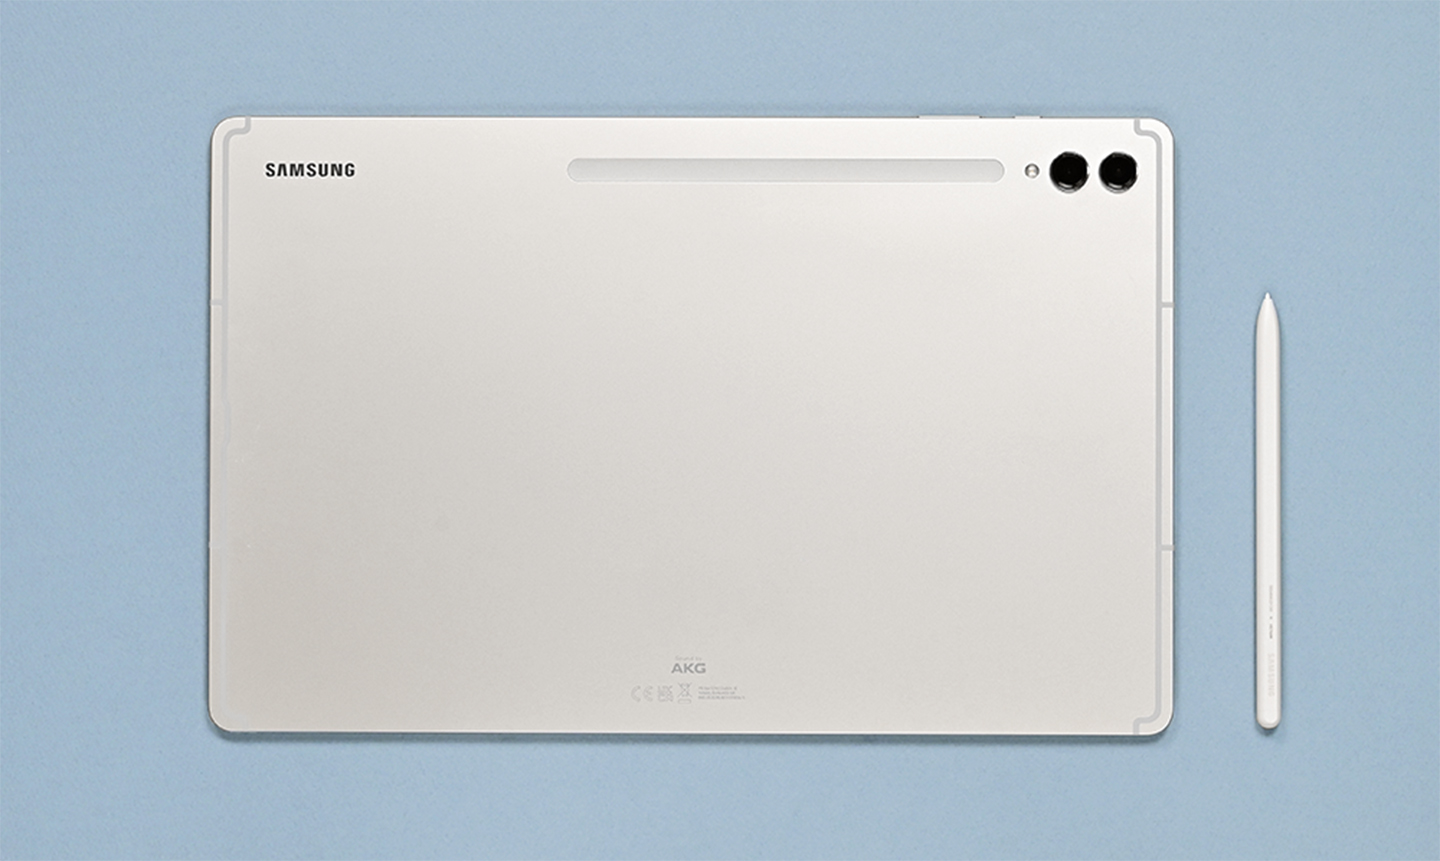 Image of unboxing the Galaxy Tab S9 Ultra showing high performance in a sleek design